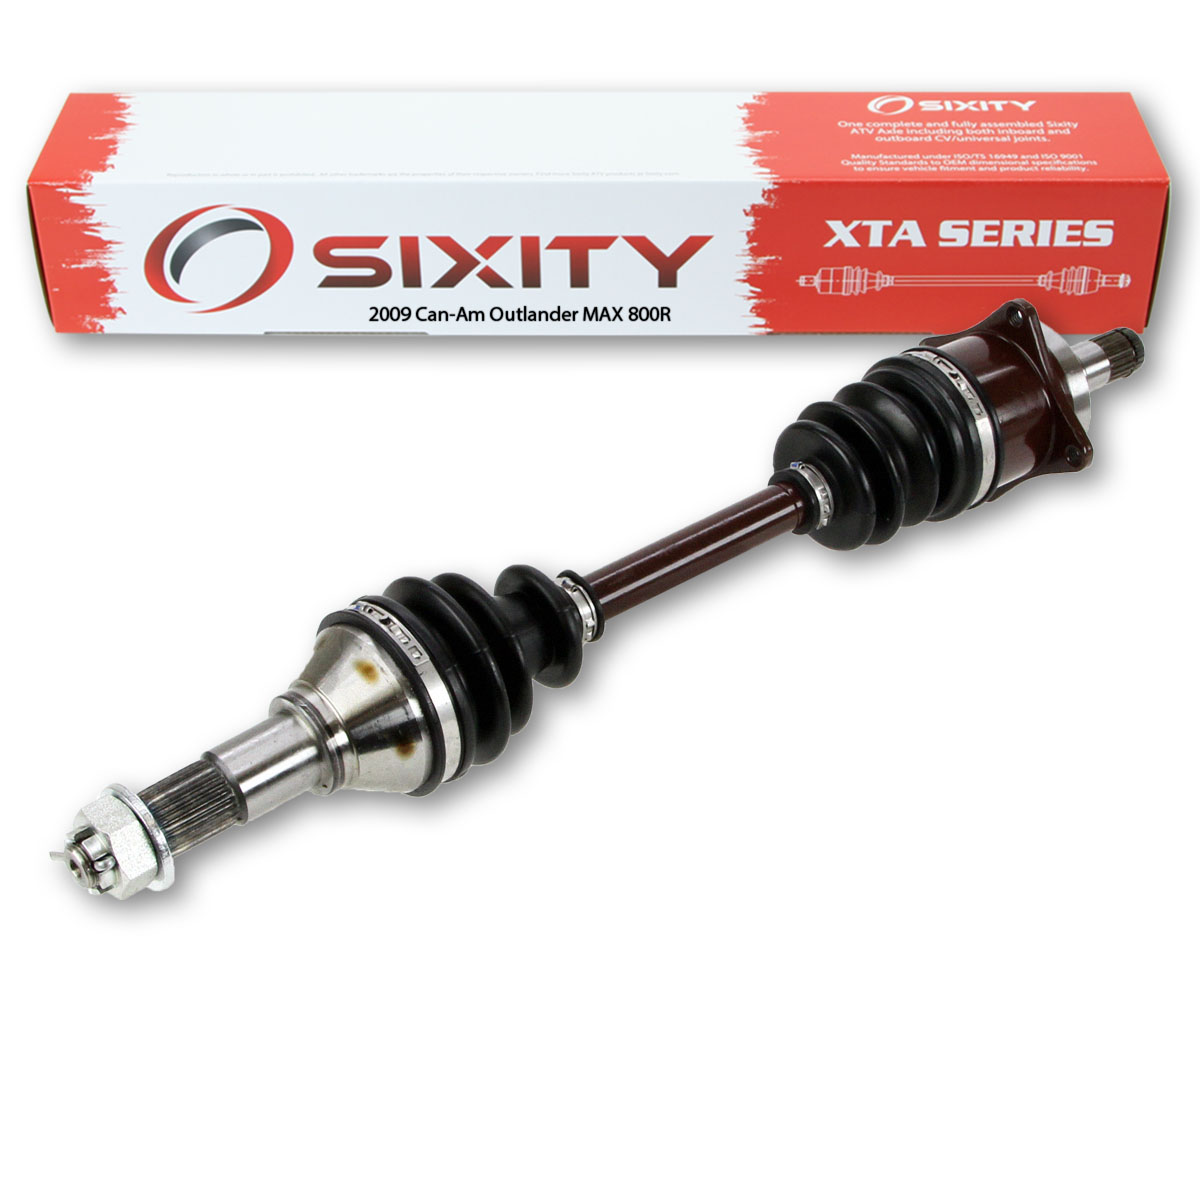 Sixity 2009 Can-Am Outlander MAX 800R 4X4 Front Left XTA ATV Axle